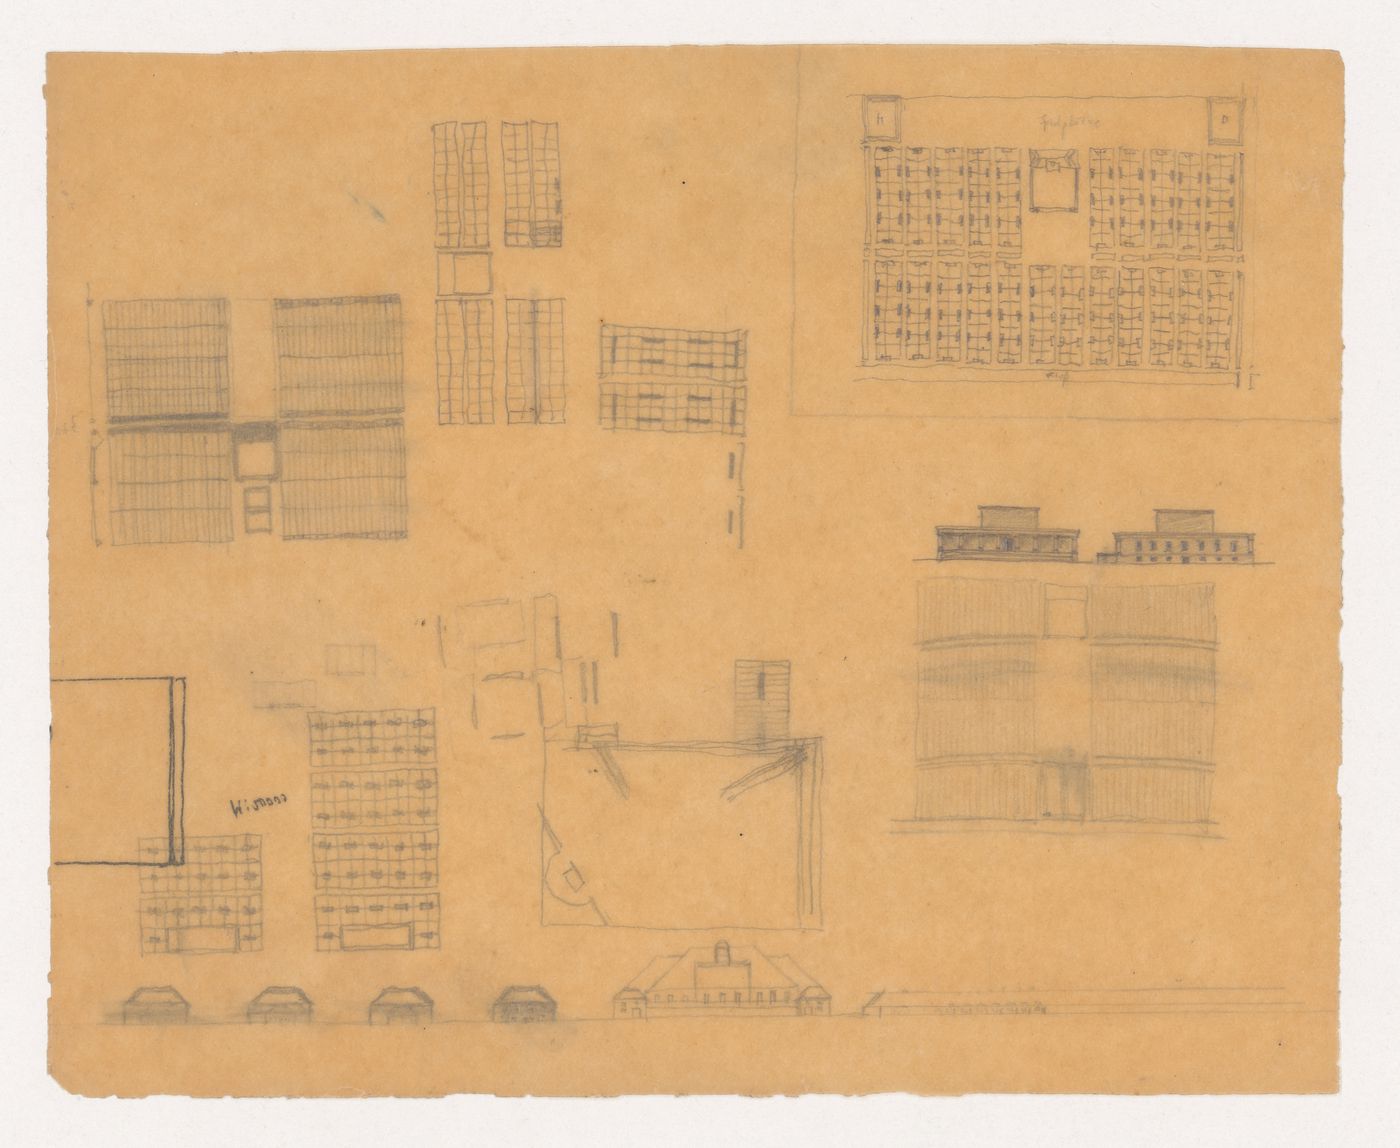 Sketches for buildings and building complexes, including a playground